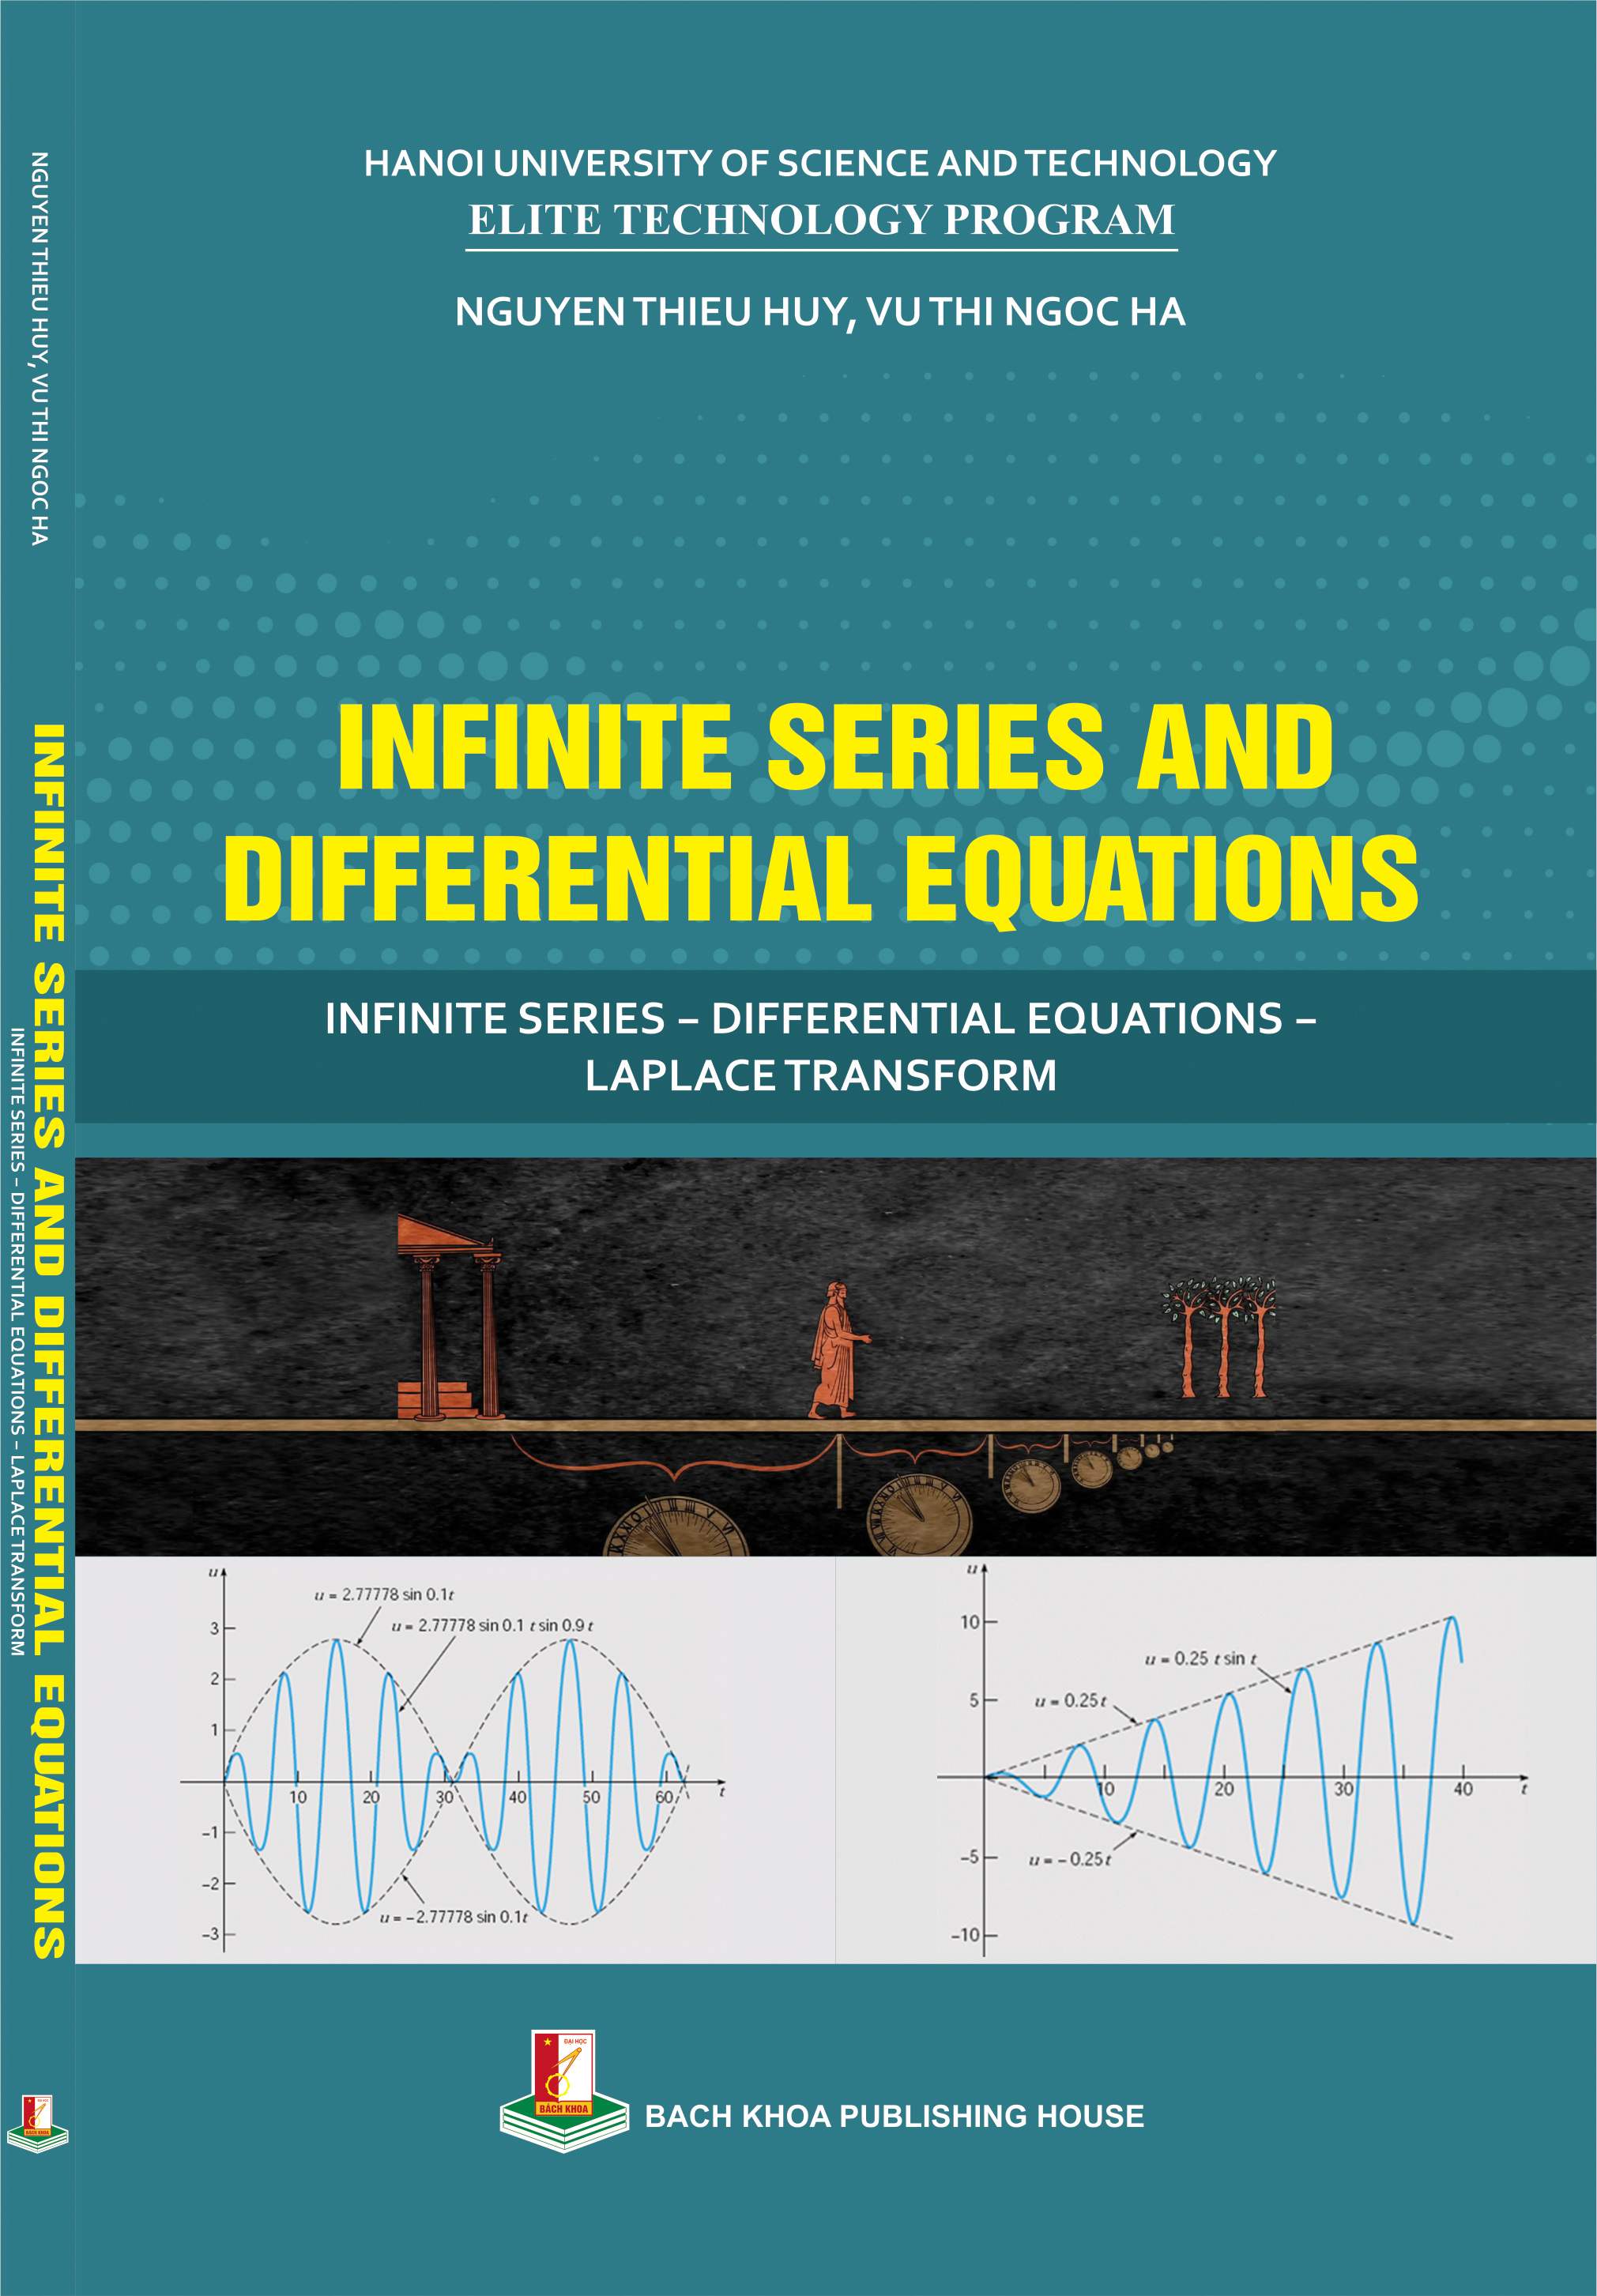 INFINITE SERIES AND DIFFERENTIAL EQUATIONS - Infinite series - Differential equations - Laplace transform